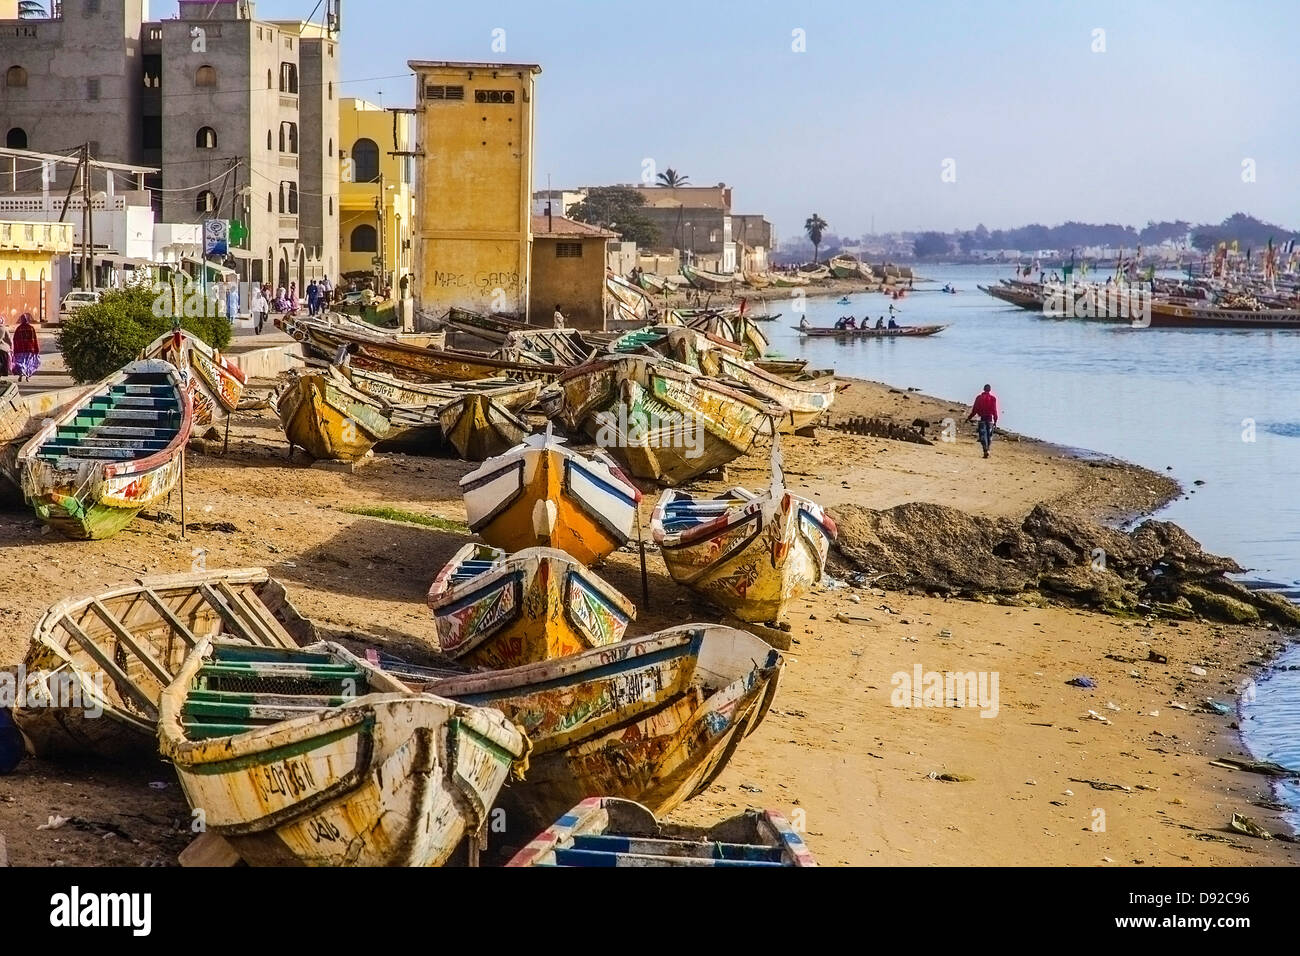 Colourful fishing boats rest on the beach in Saint-Louis, Senegal. Stock Photo